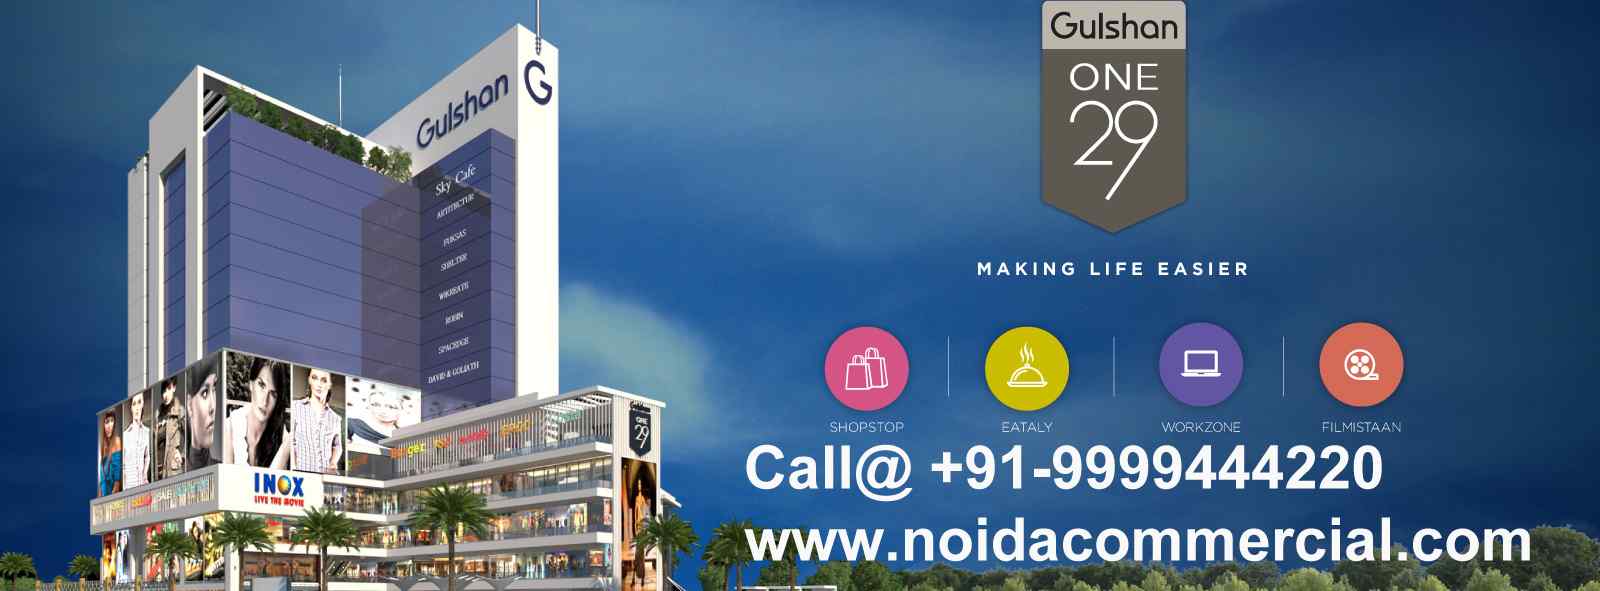 Top Class Commercial Projects in Noida and Greater Noida India